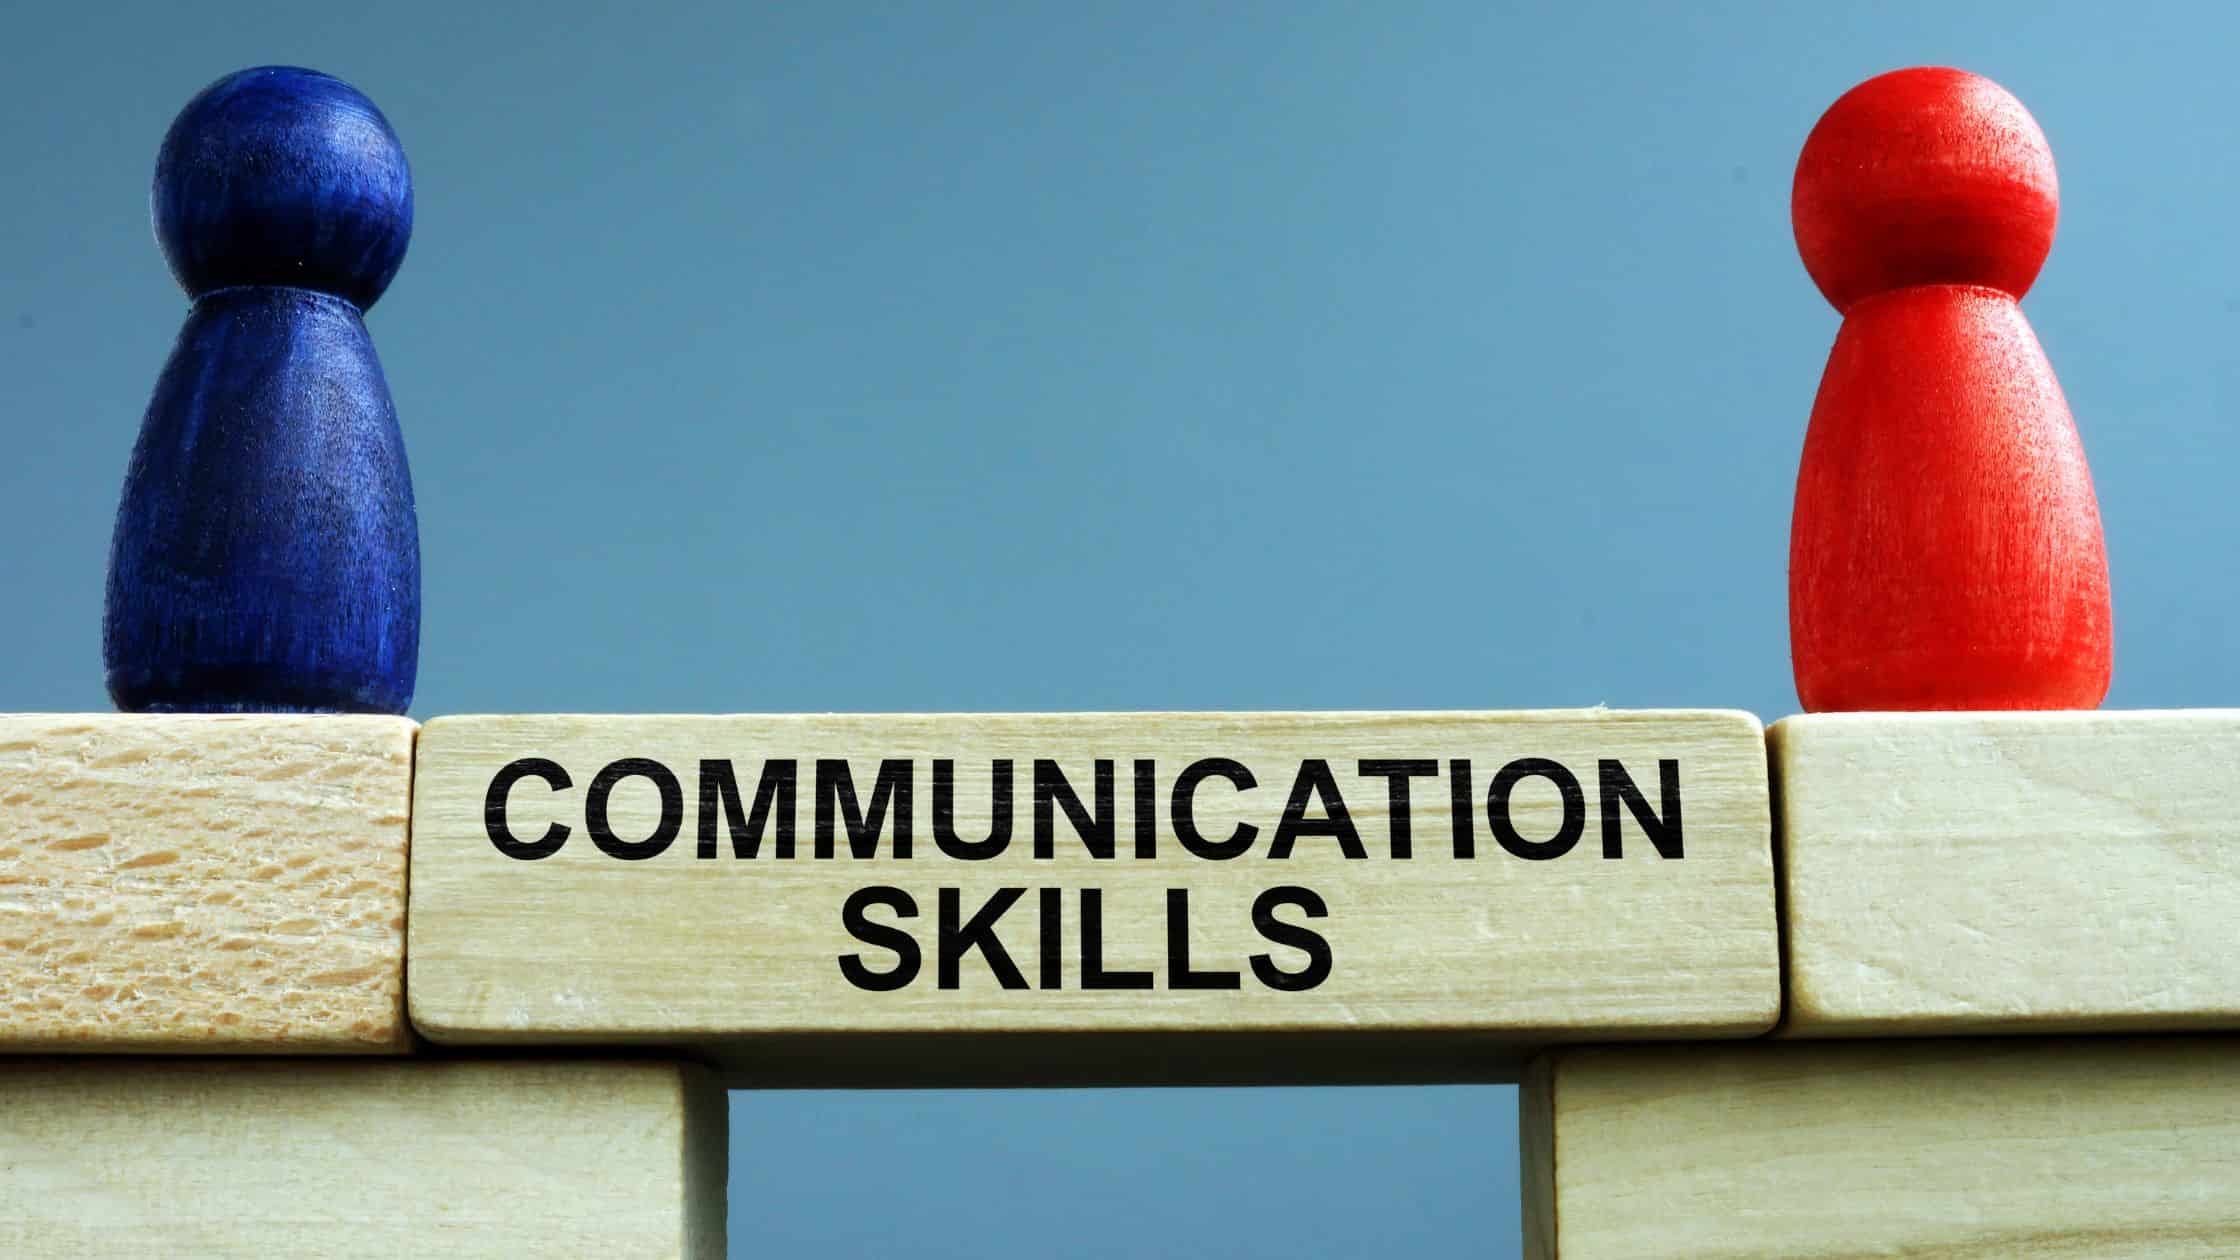 Effective communication is an essential skill that everyone should master. By learning the essential communication skills outlined, individuals can become effective communicators and achieve success in all areas of life.